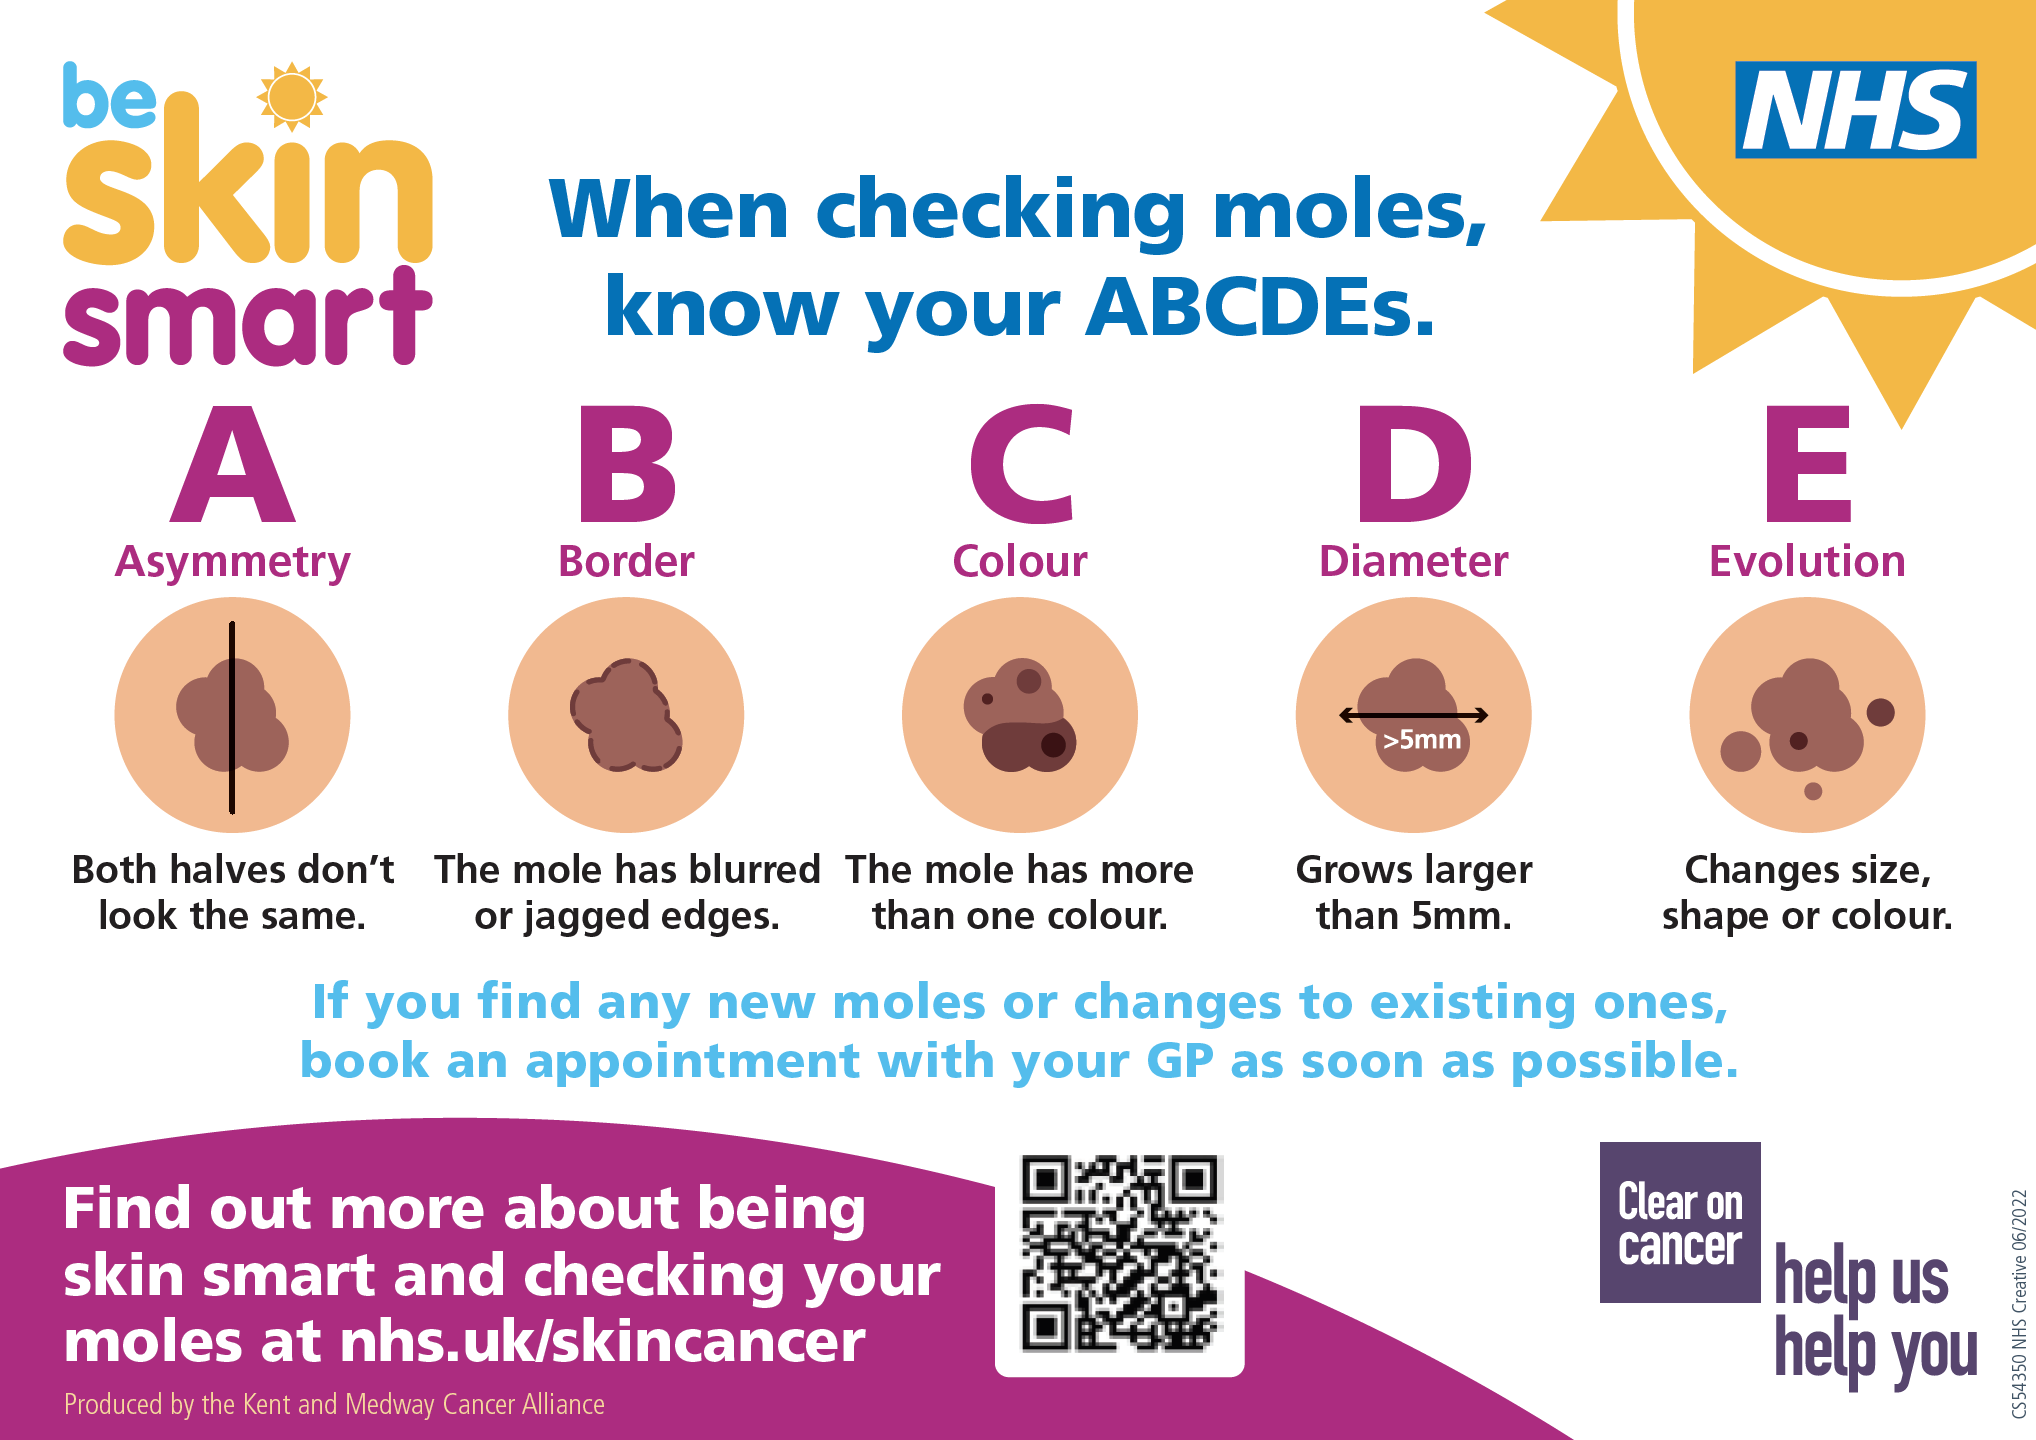 When checking moles, know your ABCDEs. A Asymmetry. Both halves don’t look the same. B Border. The mole has blurred or jagged edges. C Colour. The mole has more than one colour. D Diameter. Grows larger than 5mm. E Evolution Changes size, shape or colour. If you find any new moles or changes to existing ones, book an appointment with your GP as soon as possible. Find out more about being skin smart and checking your moles at nhs.uk/skincancer Produced by the Kent and Medway Cancer Alliance.